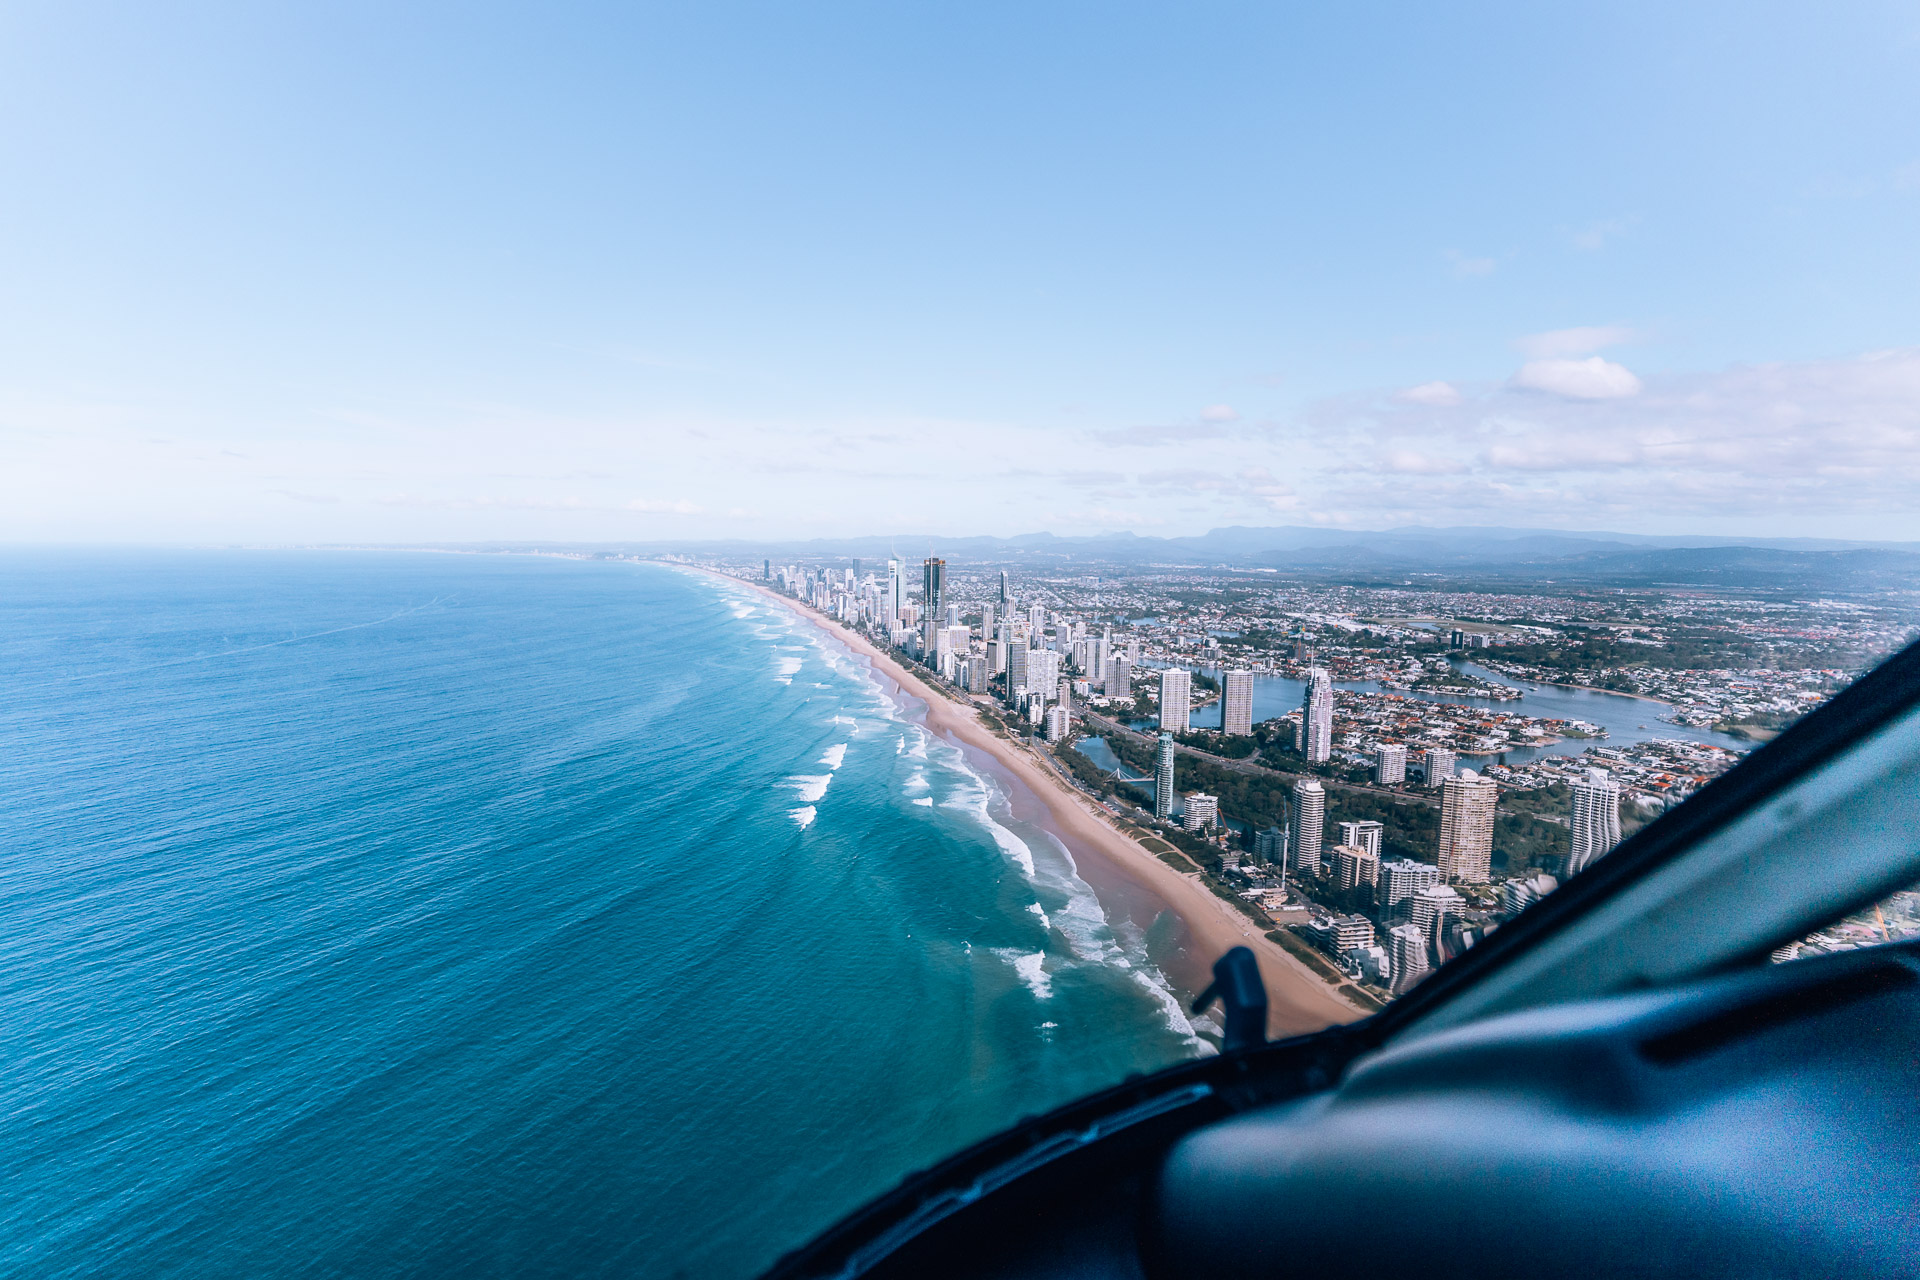 A scenic helicopter tour with Sea World Helicopters